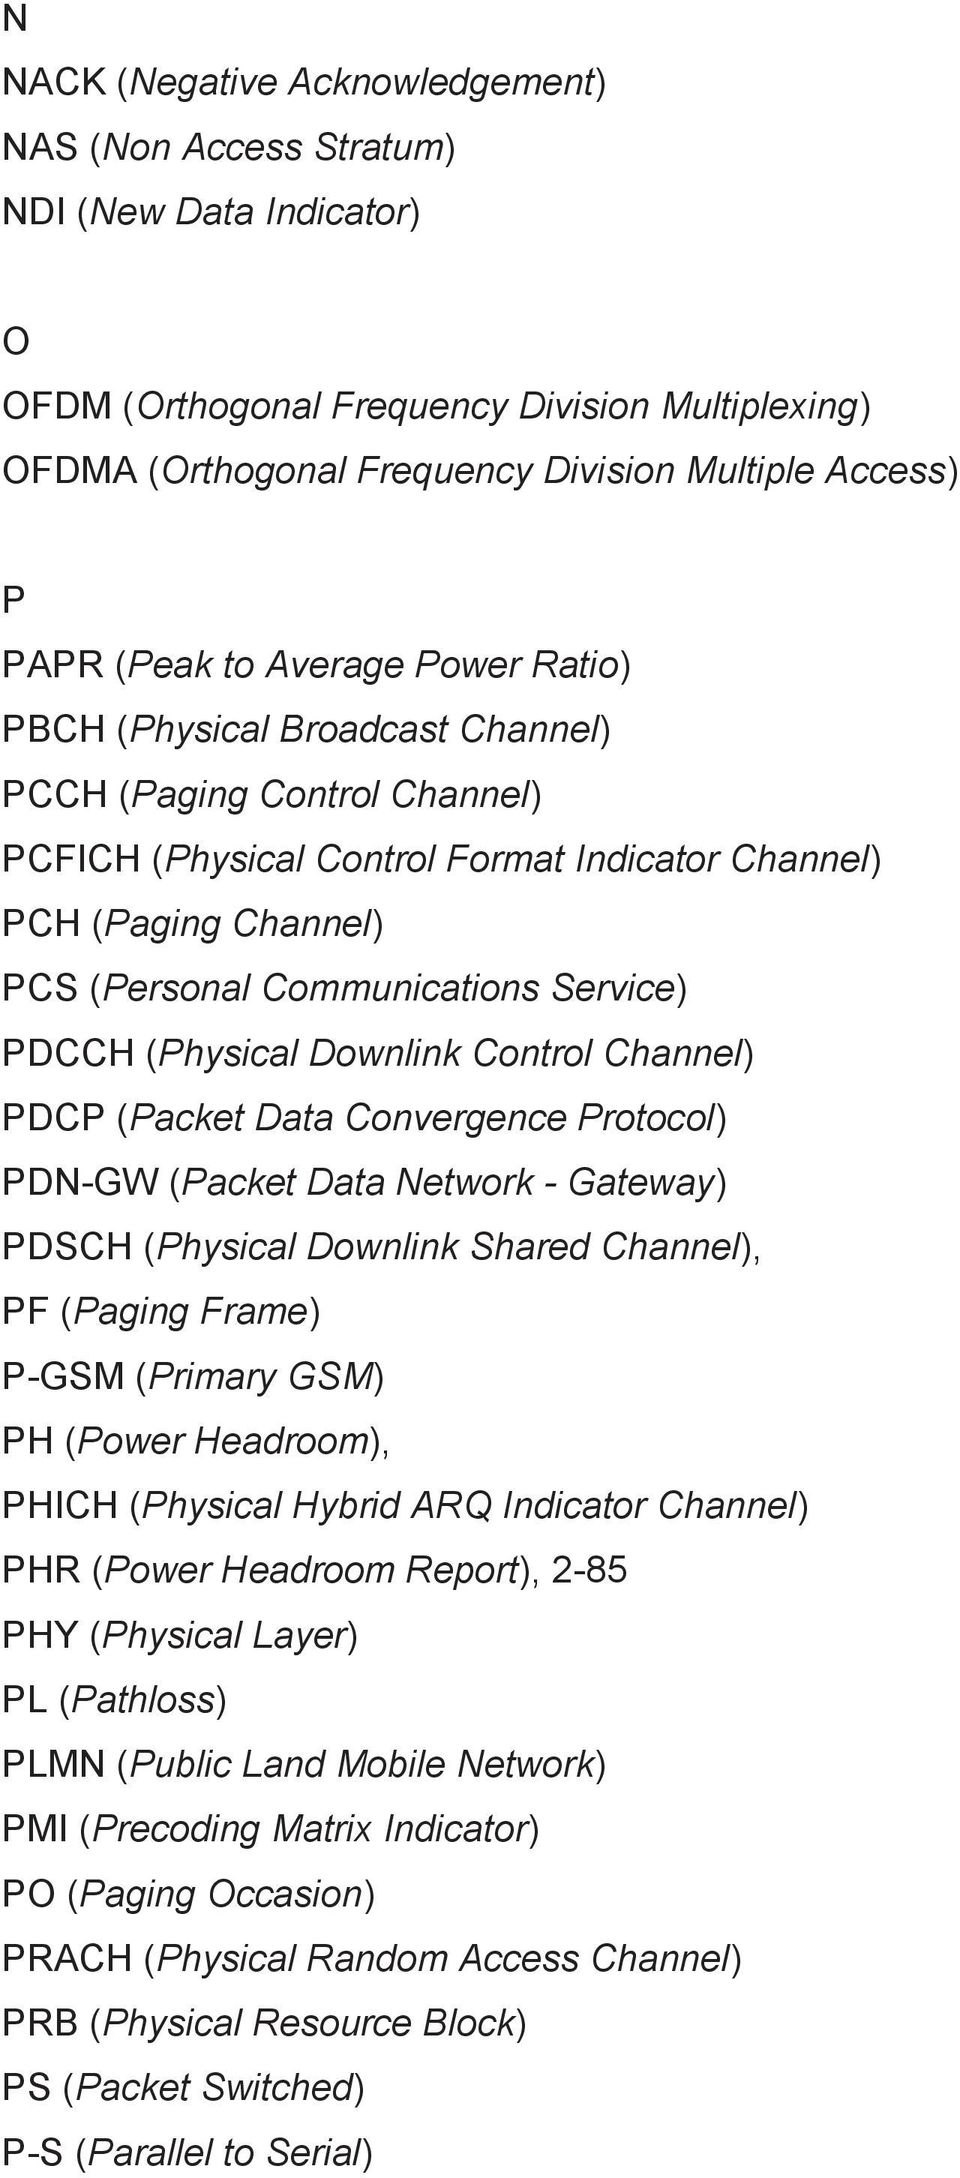 Service) PDCCH (Physical Downlink Control Channel) PDCP (Packet Data Convergence Protocol) PDN-GW (Packet Data Network - Gateway) PDSCH (Physical Downlink Shared Channel), PF (Paging Frame) P-GSM